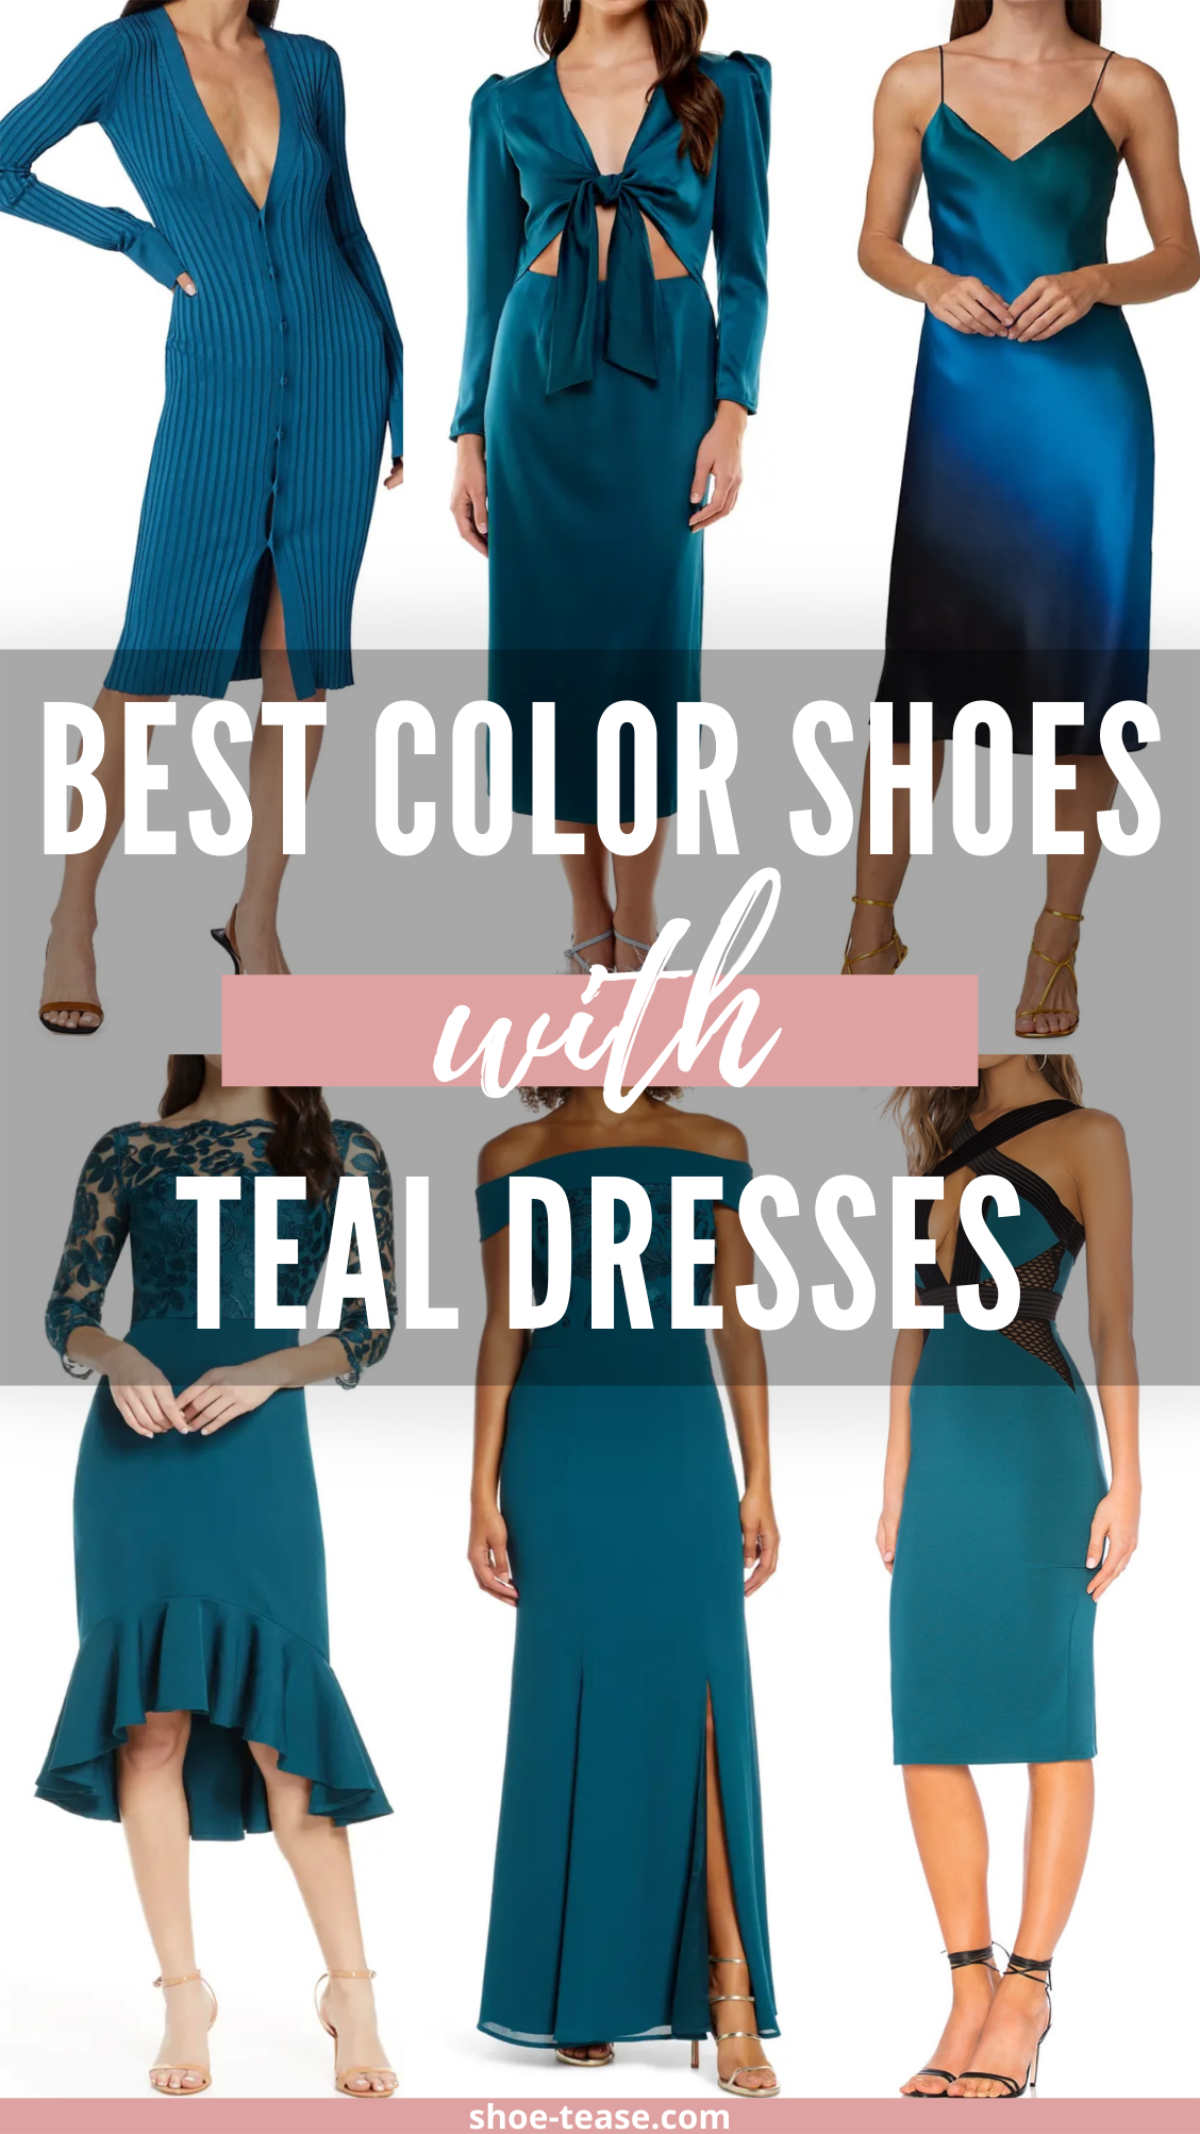 Best Color Shoes to Wear with Teal Dresses PINsm